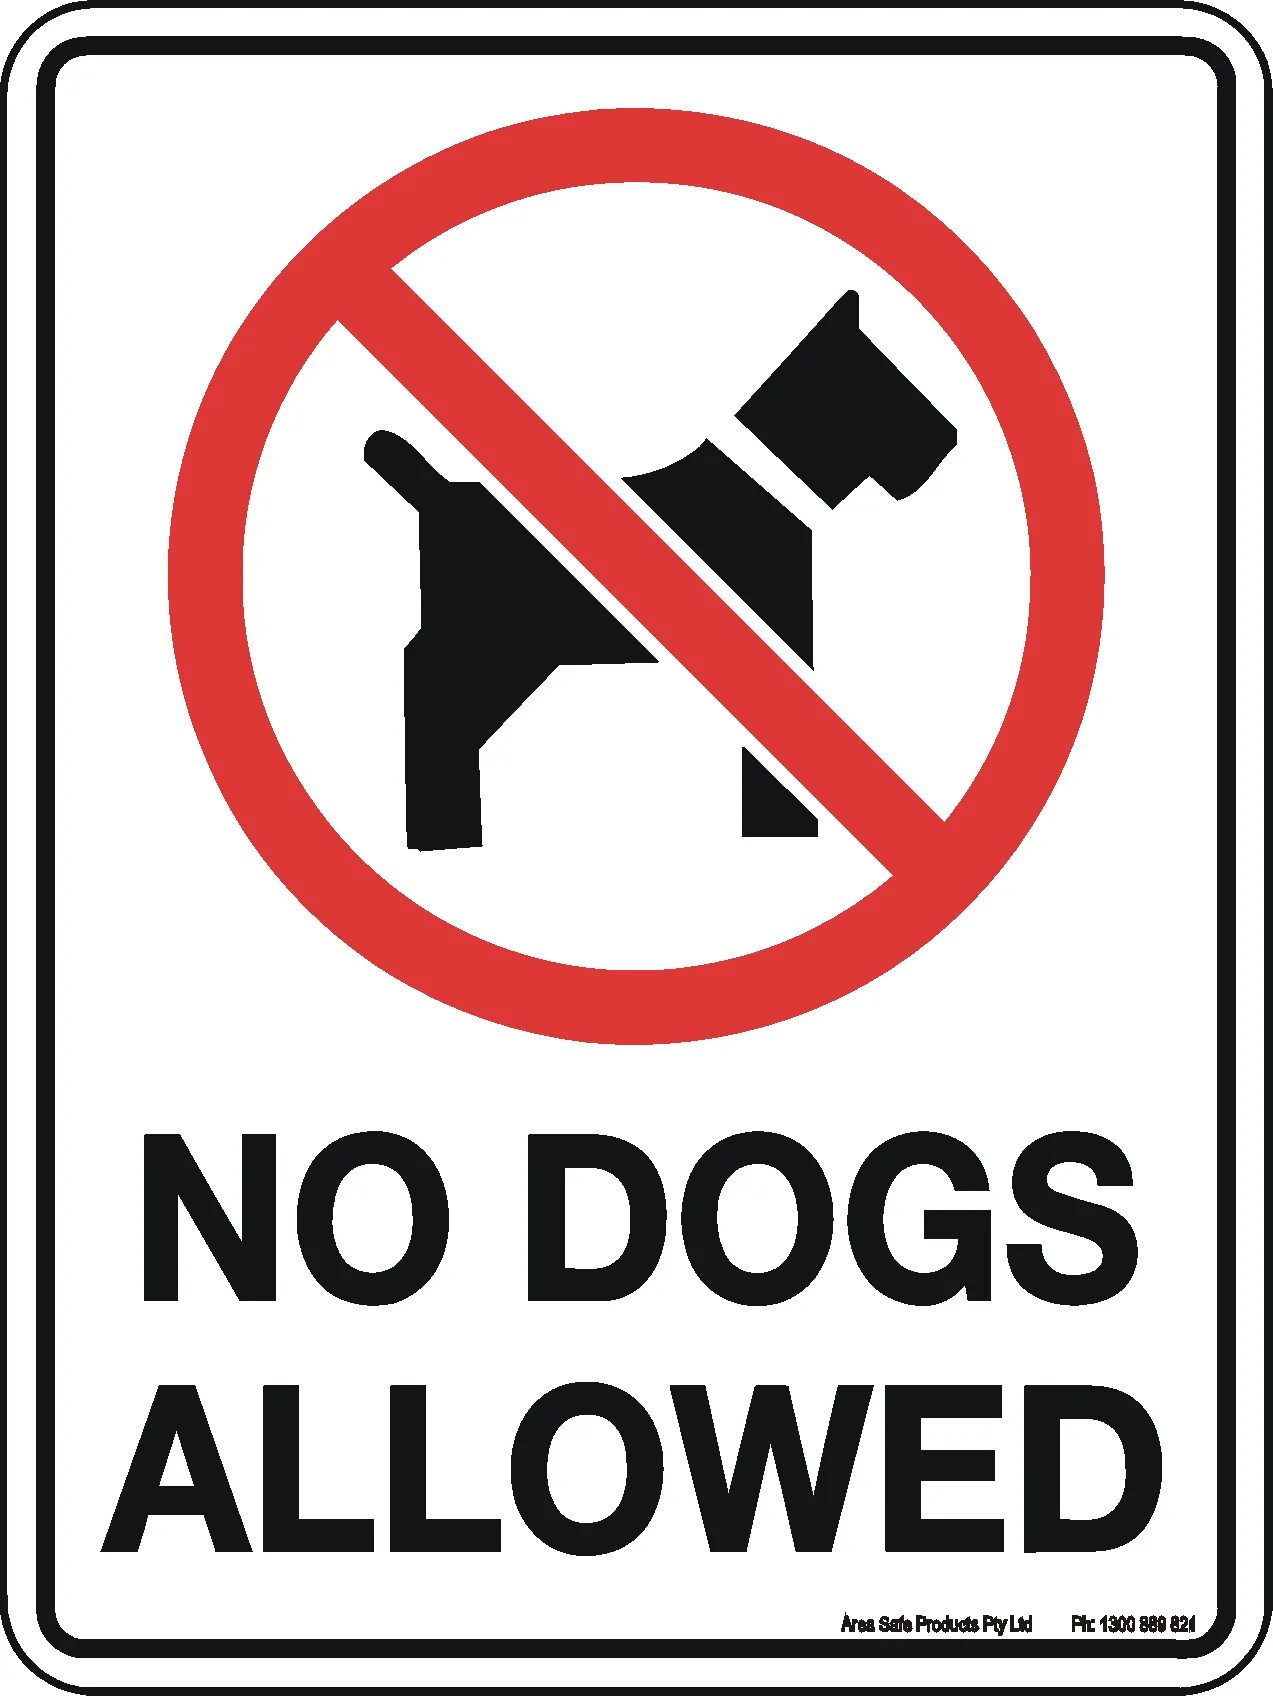 No Dogs allowed. No Dogs allowed sign. Знак Russians and Dogs are not allowed. Not allowed Dog.